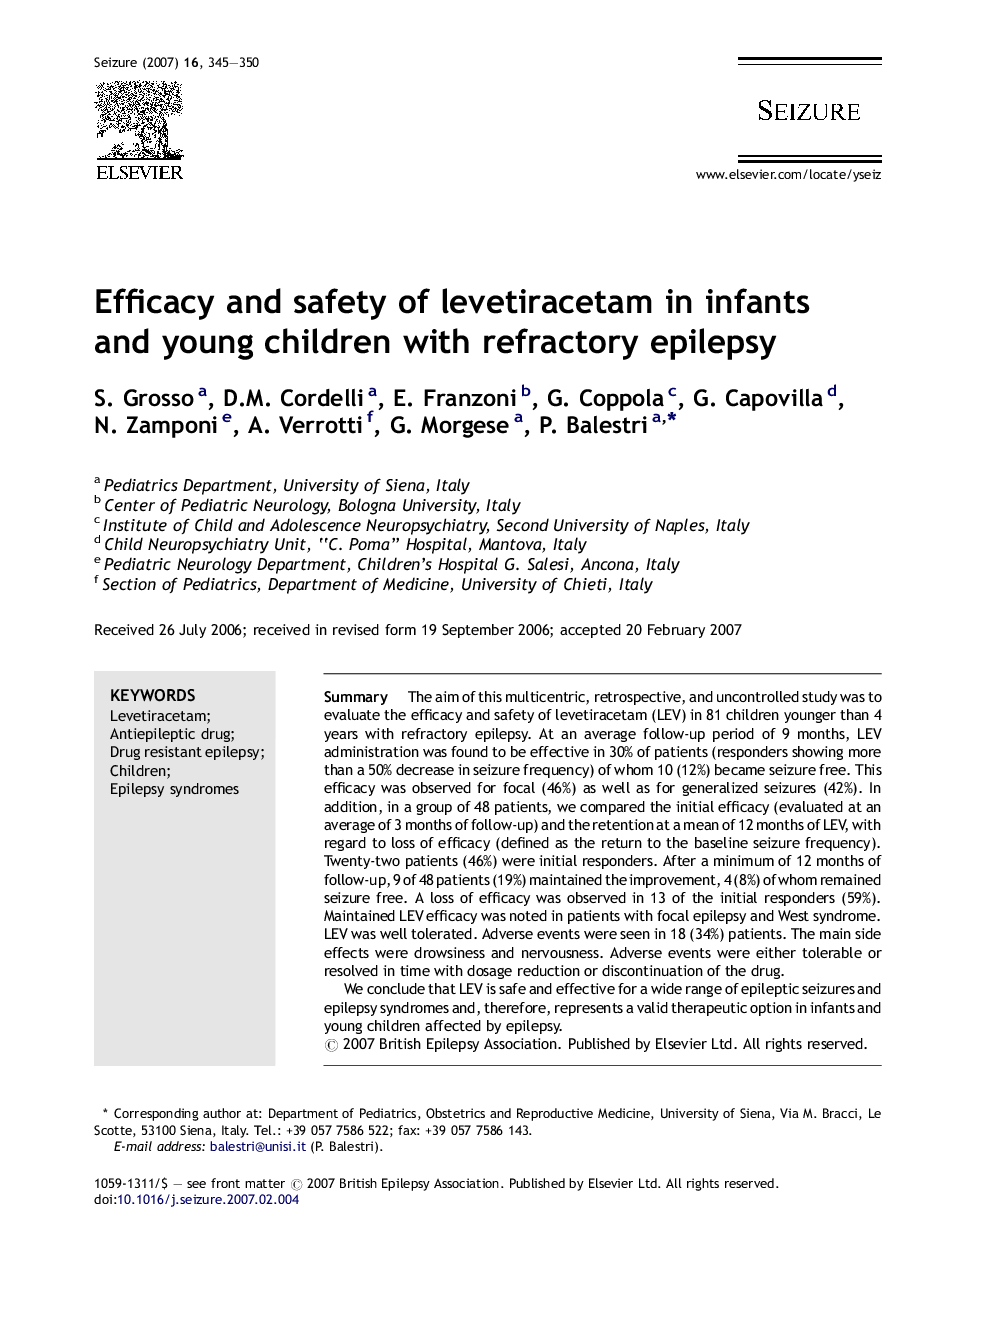 Efficacy and safety of levetiracetam in infants and young children with refractory epilepsy